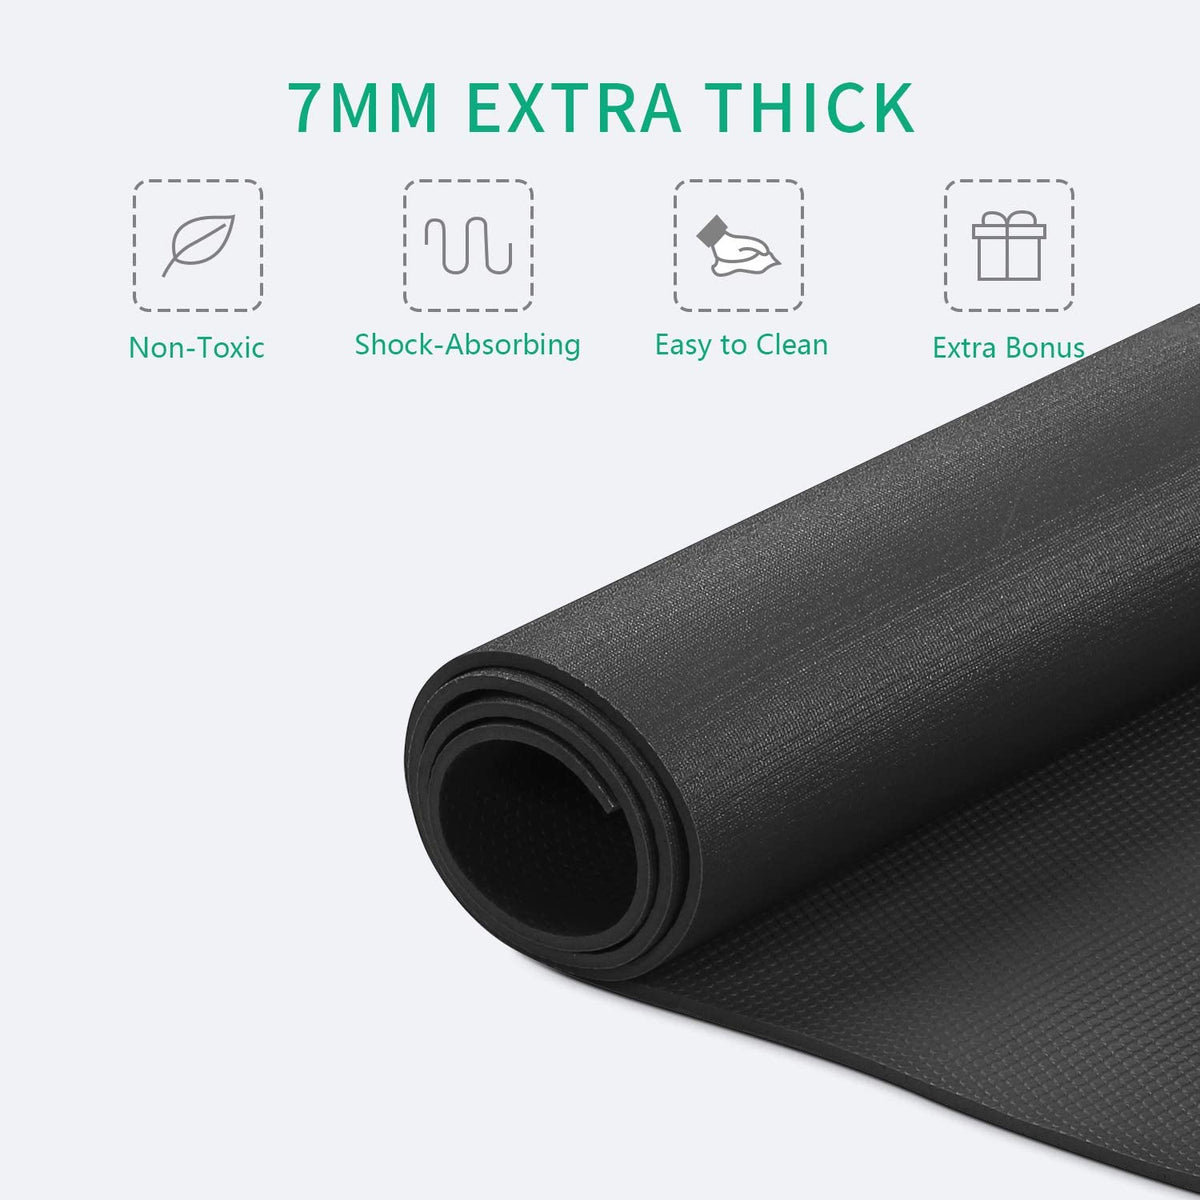 ZENOVA Large Workout Mat High Density Thick Exercise Mat 8'x5'/7'x5' x7mm Gym Flooring Cardio Mat, Shoe Friendly for All Intense Fitness and Home Workout